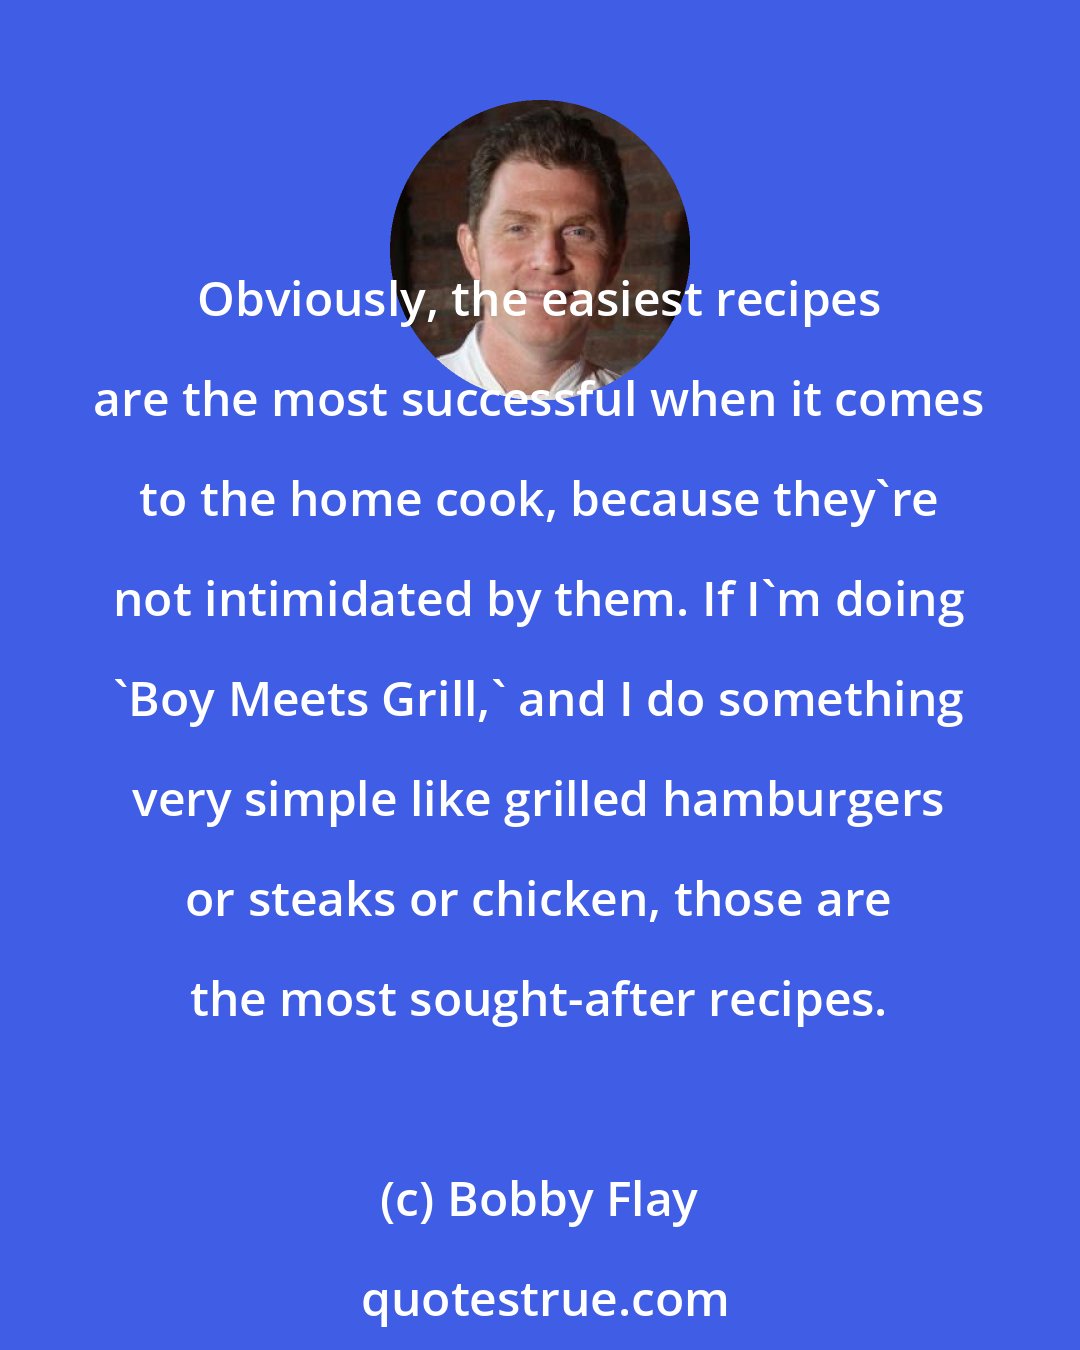 Bobby Flay: Obviously, the easiest recipes are the most successful when it comes to the home cook, because they're not intimidated by them. If I'm doing 'Boy Meets Grill,' and I do something very simple like grilled hamburgers or steaks or chicken, those are the most sought-after recipes.